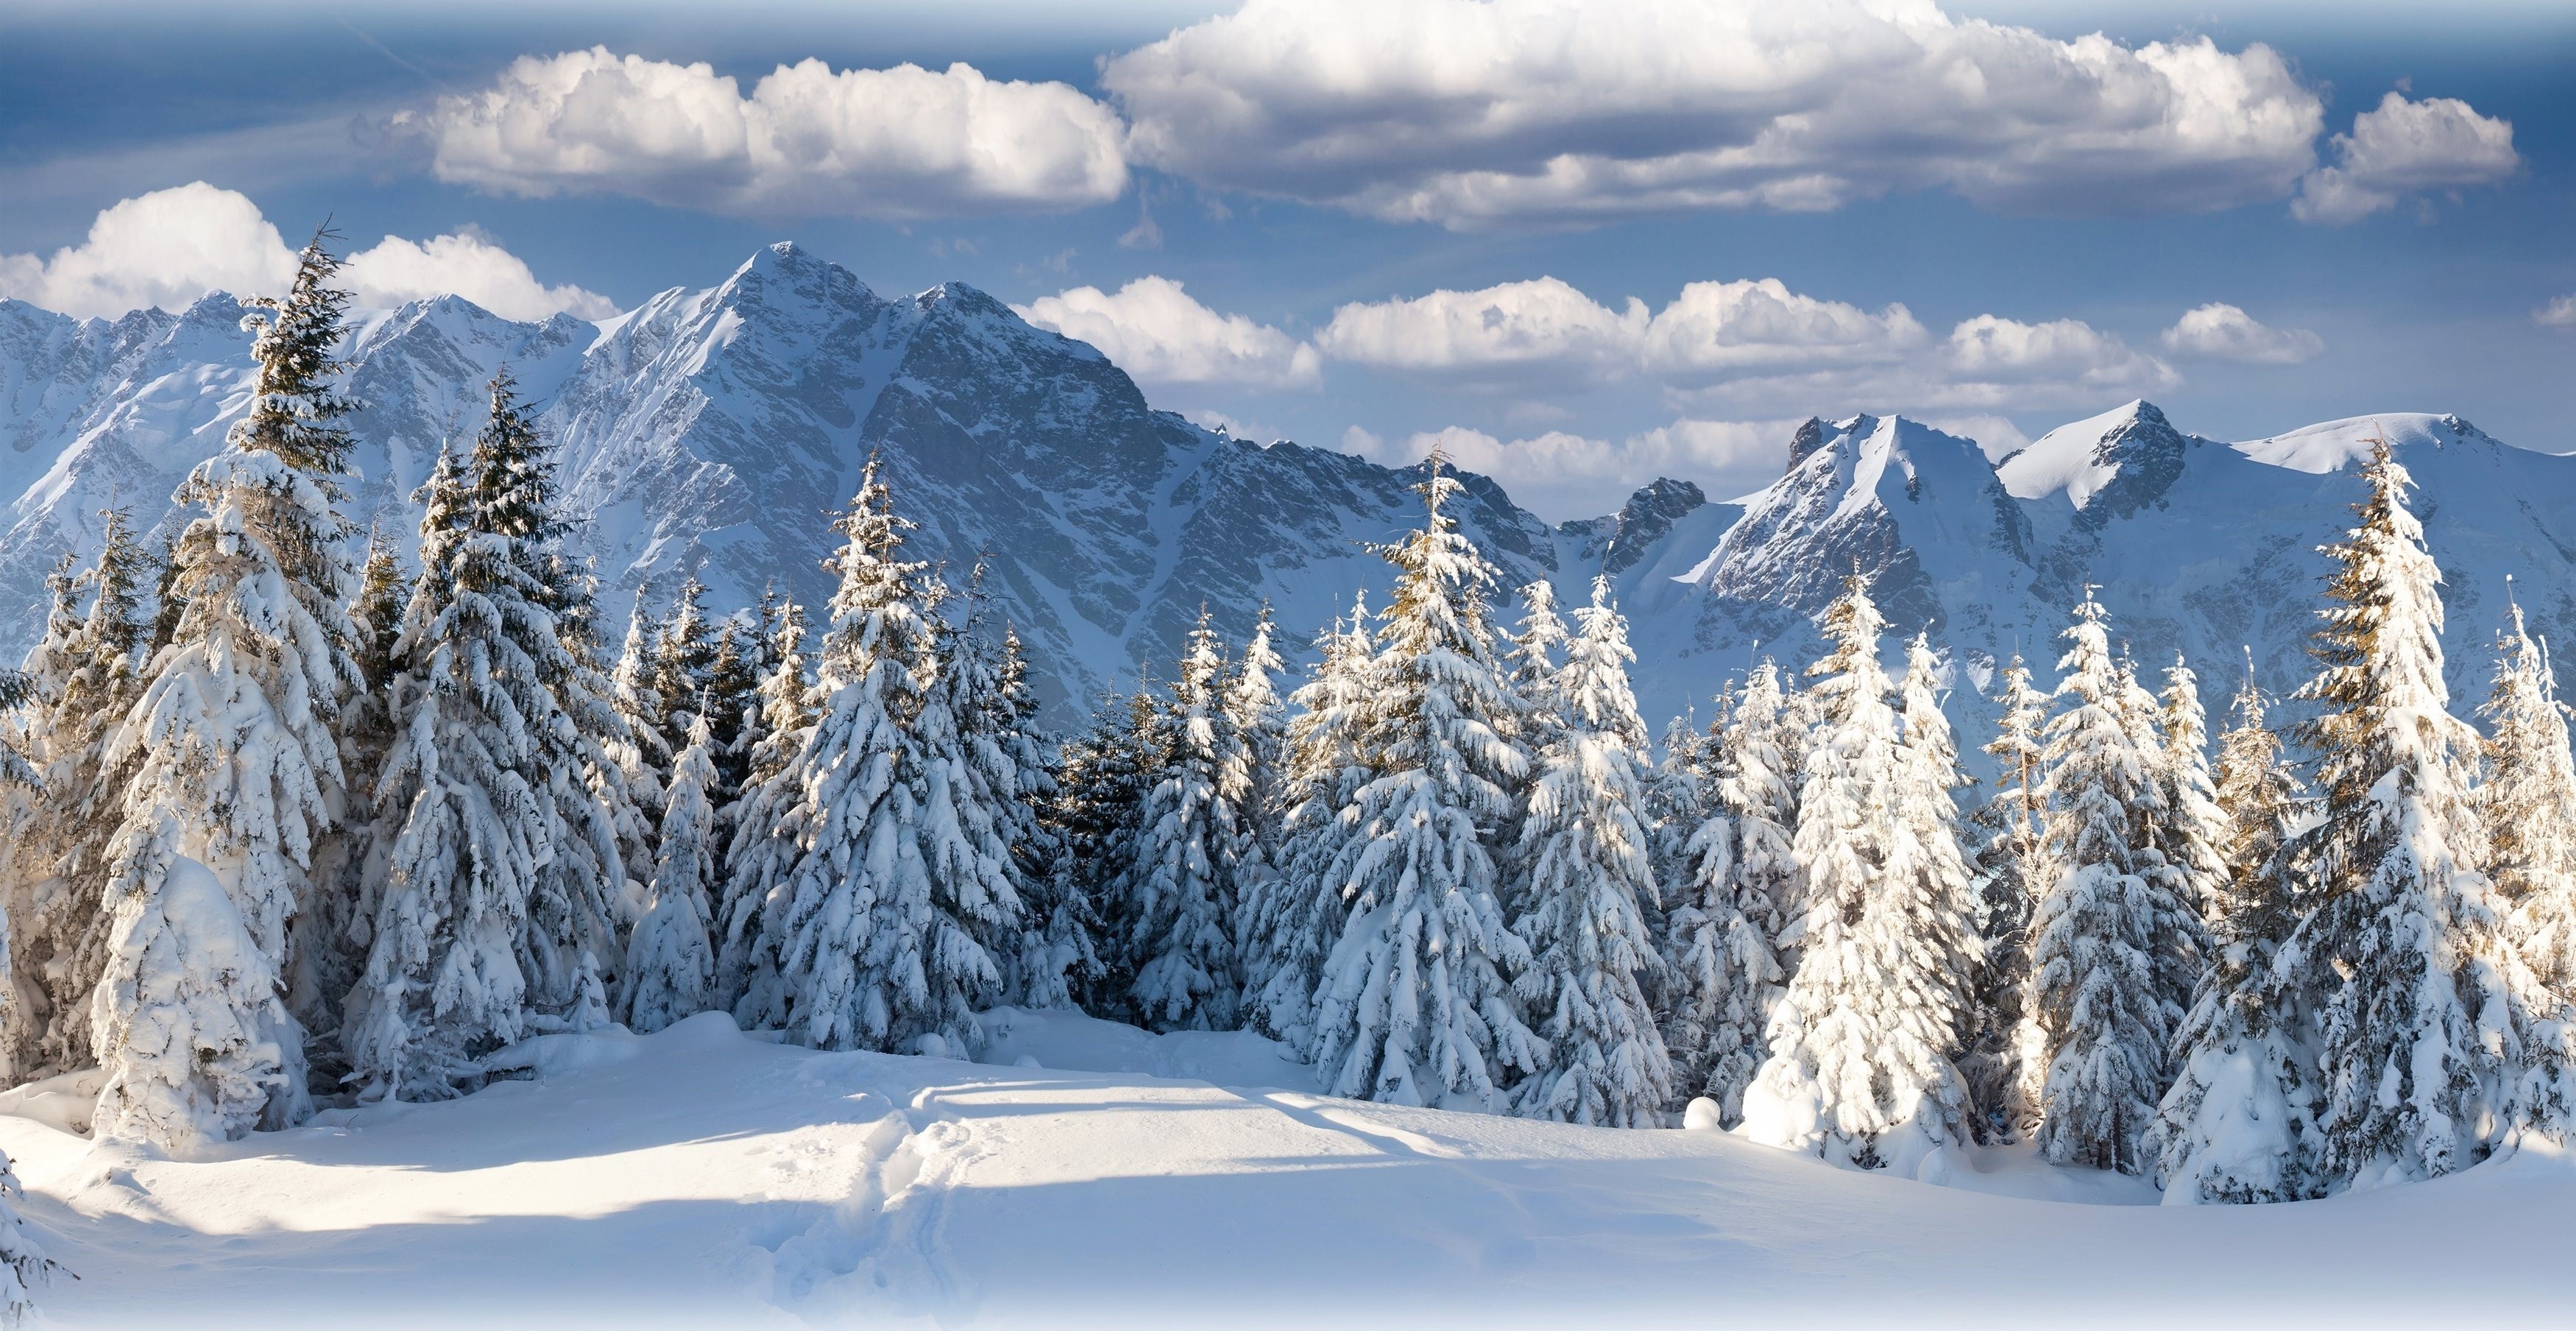 General 3500x1808 winter landscape nature snow trees mountains forest snowy peak